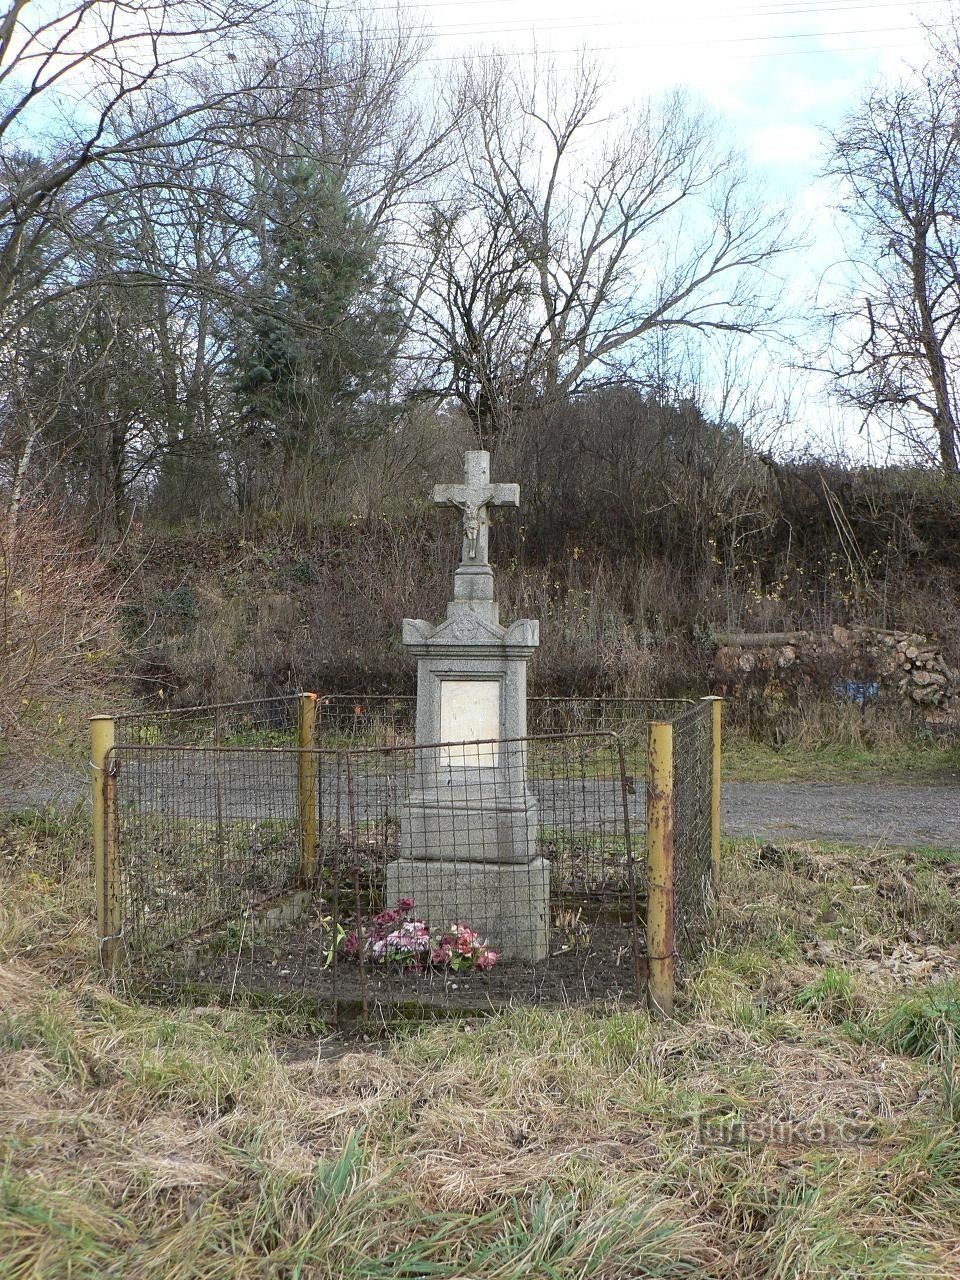 Saddle, a cross on the edge of the village